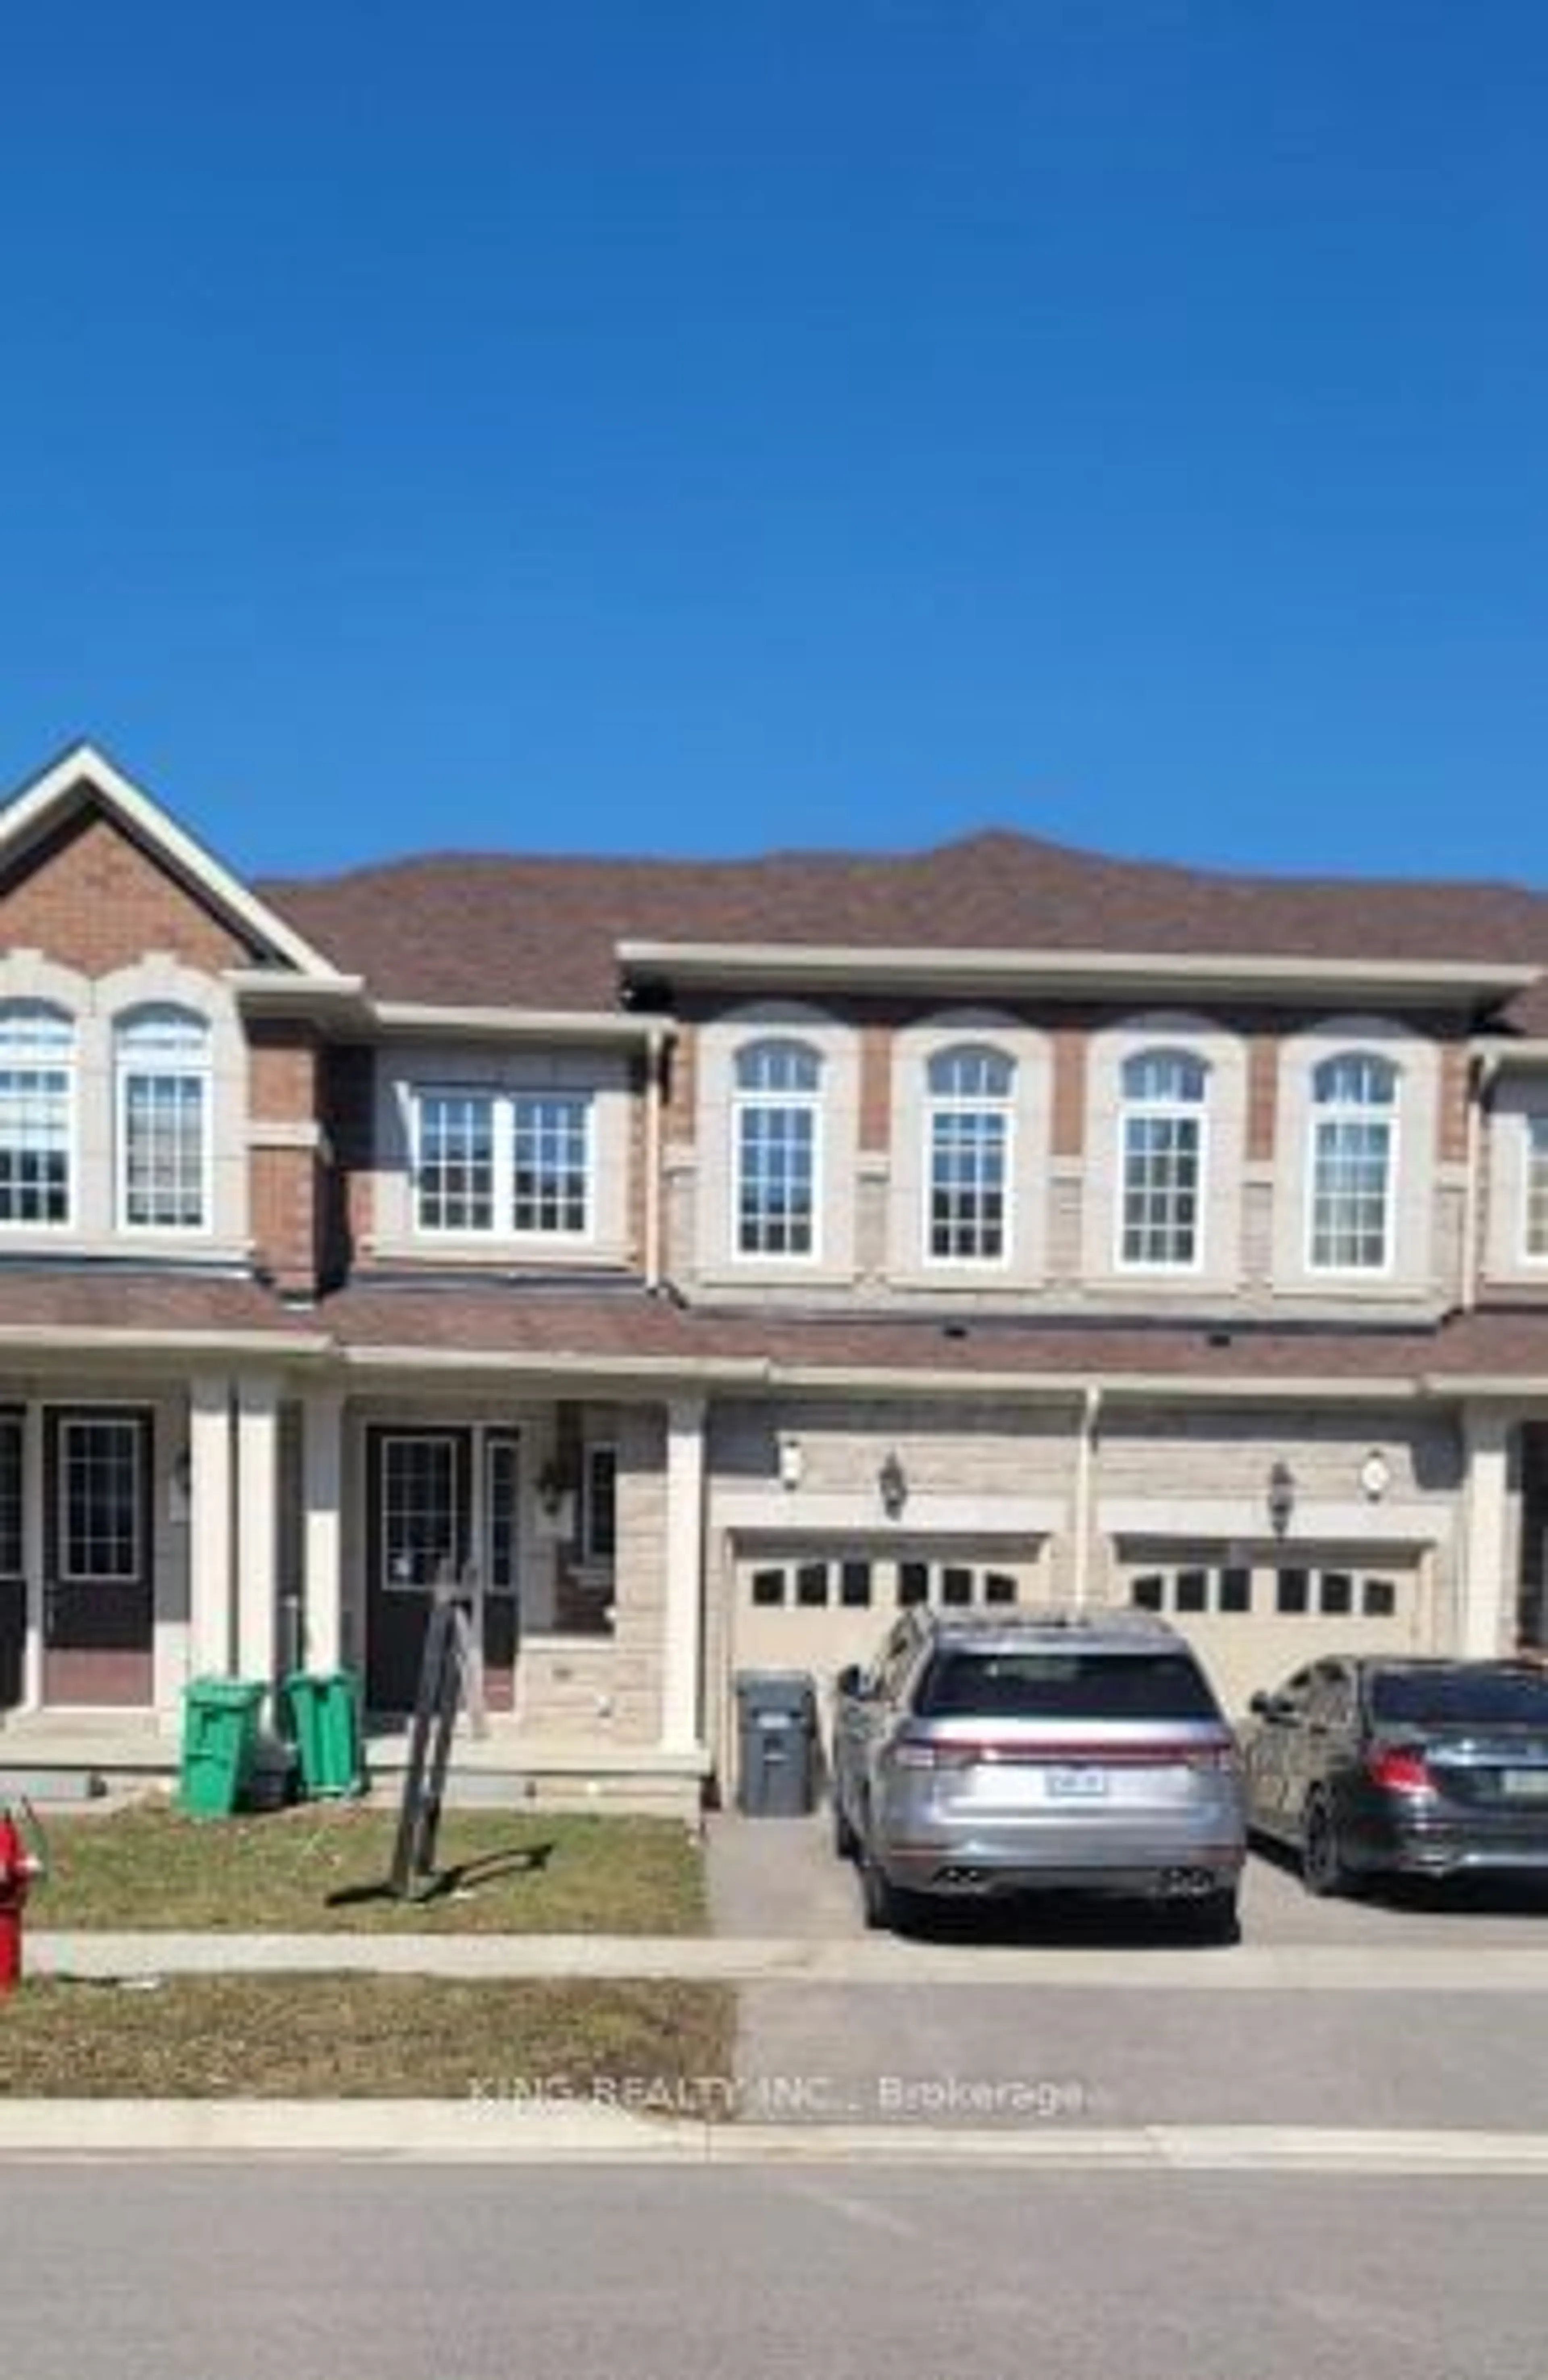 Home with brick exterior material for 30 Fresnel Rd, Brampton Ontario L7A 4Z3